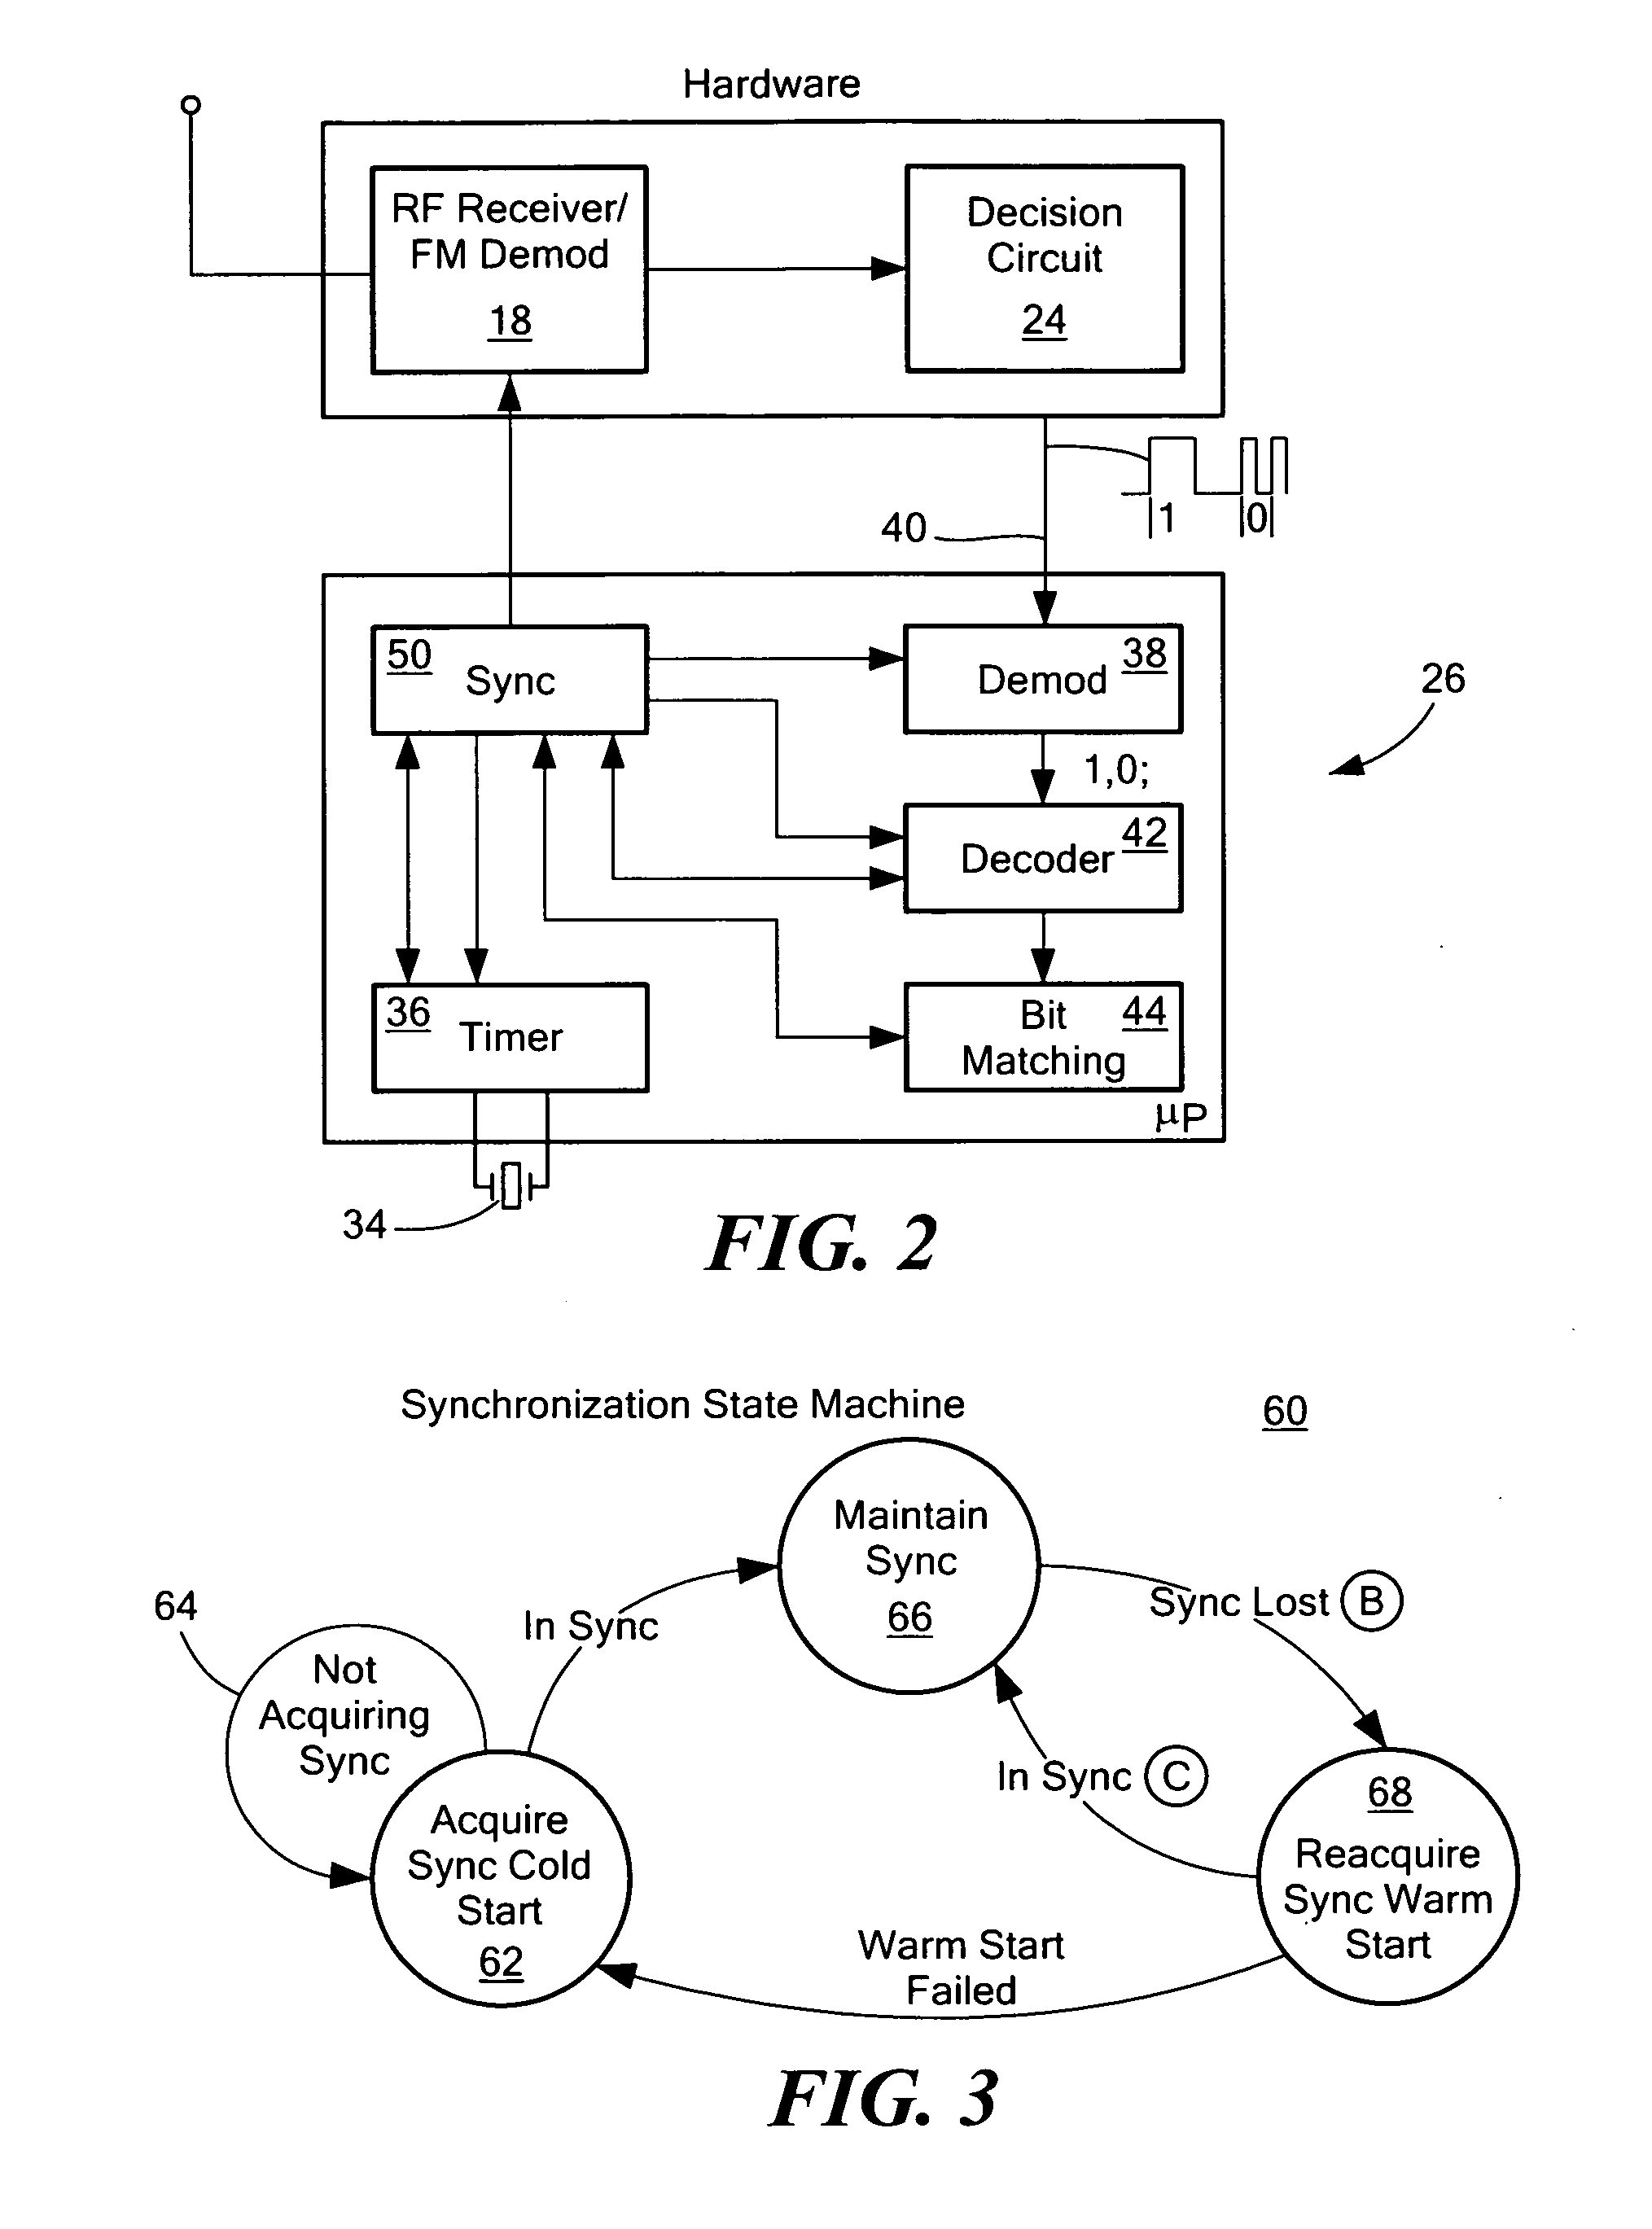 Synchronization system and method for achieving low power battery operation of a vehicle locating unit in a stolen vehicle recovery system which receives periodic transmissions